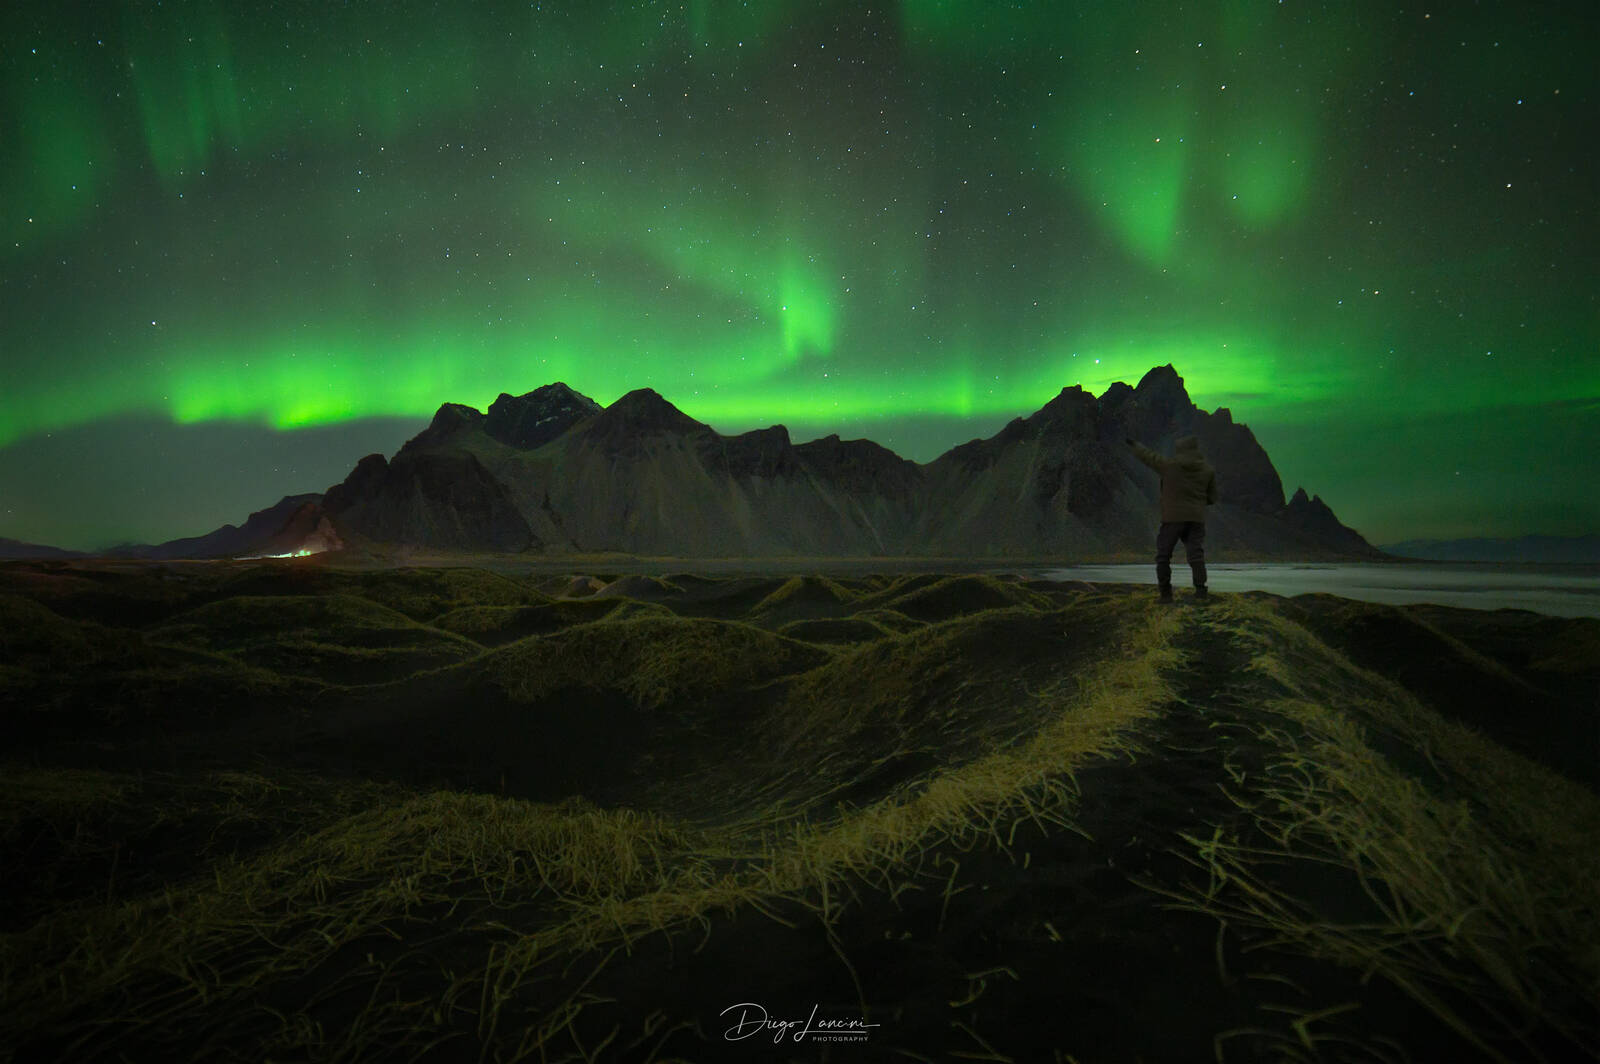 Image of Stokksnes by Diego Lancini